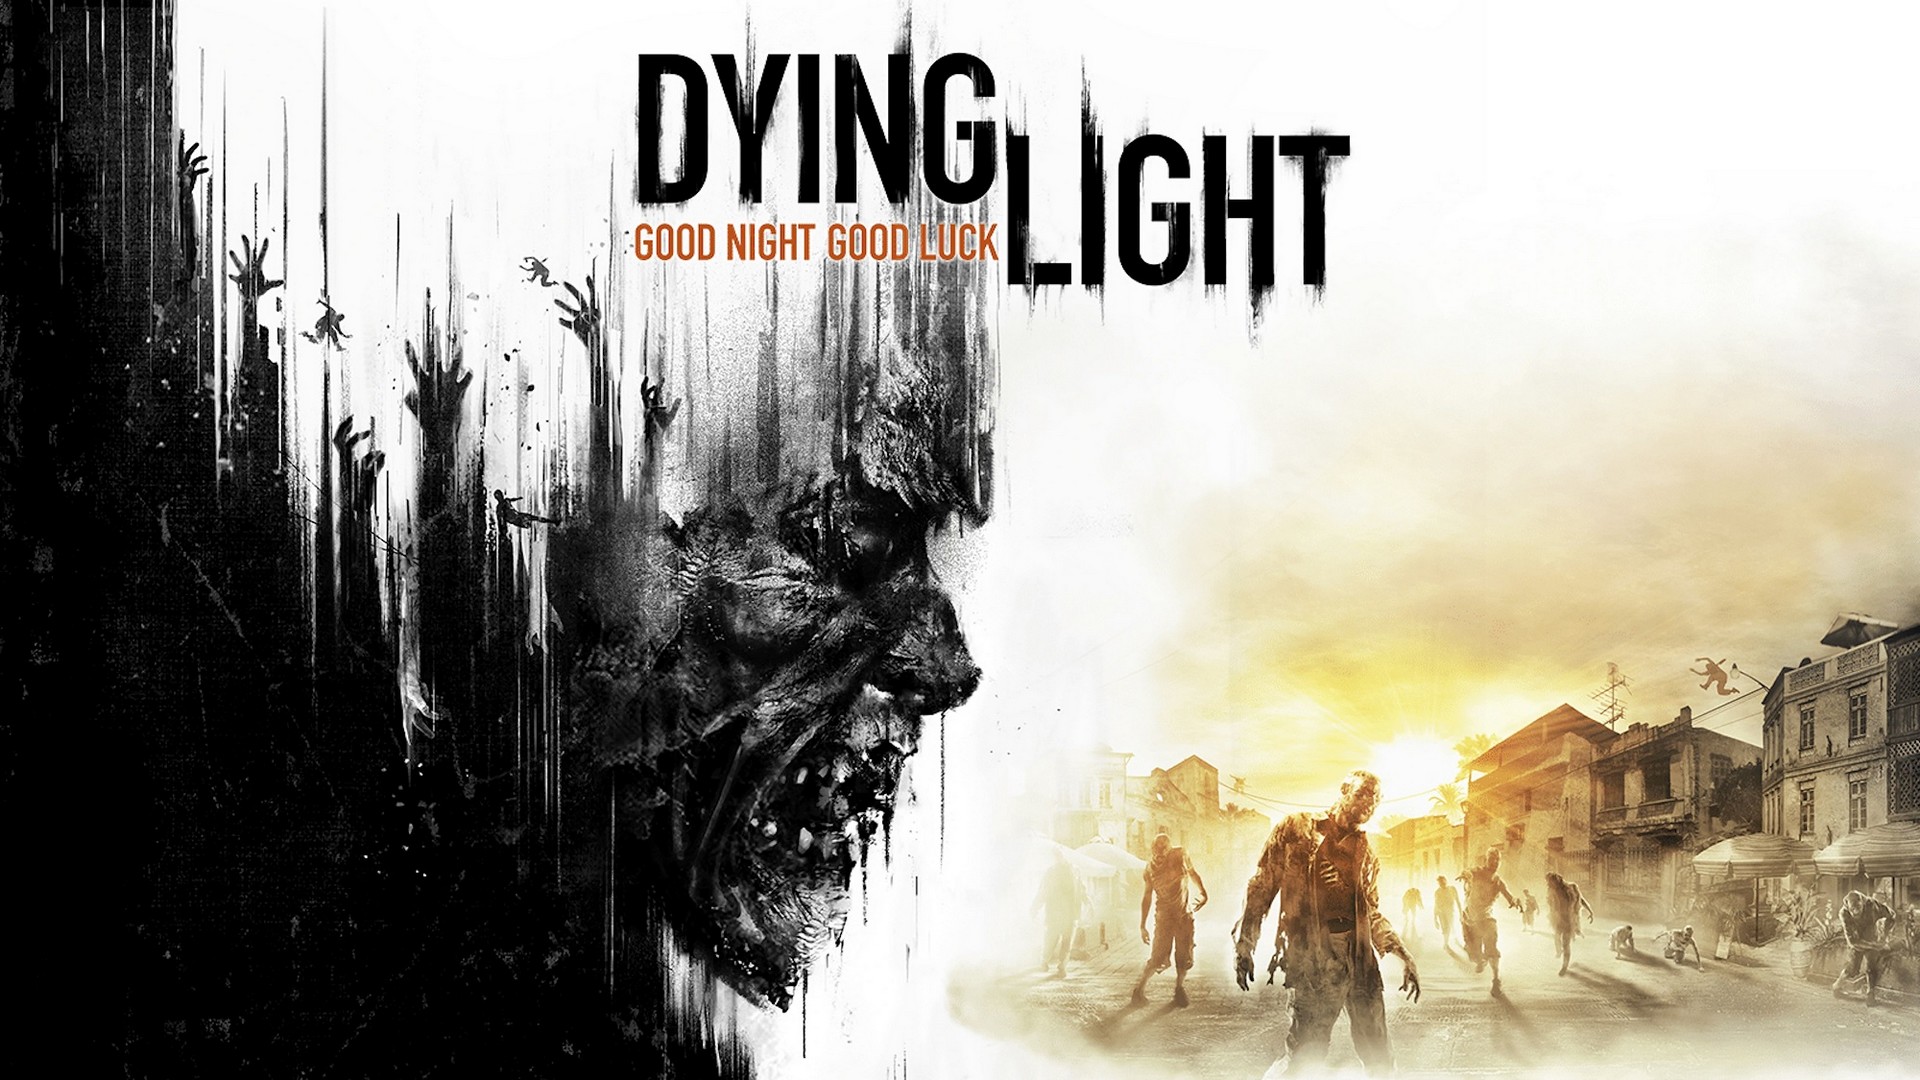 Dying Light 1 Gets A Next-Gen Patch Improving Performance On PS5 And PS4  Pro - GameSpot